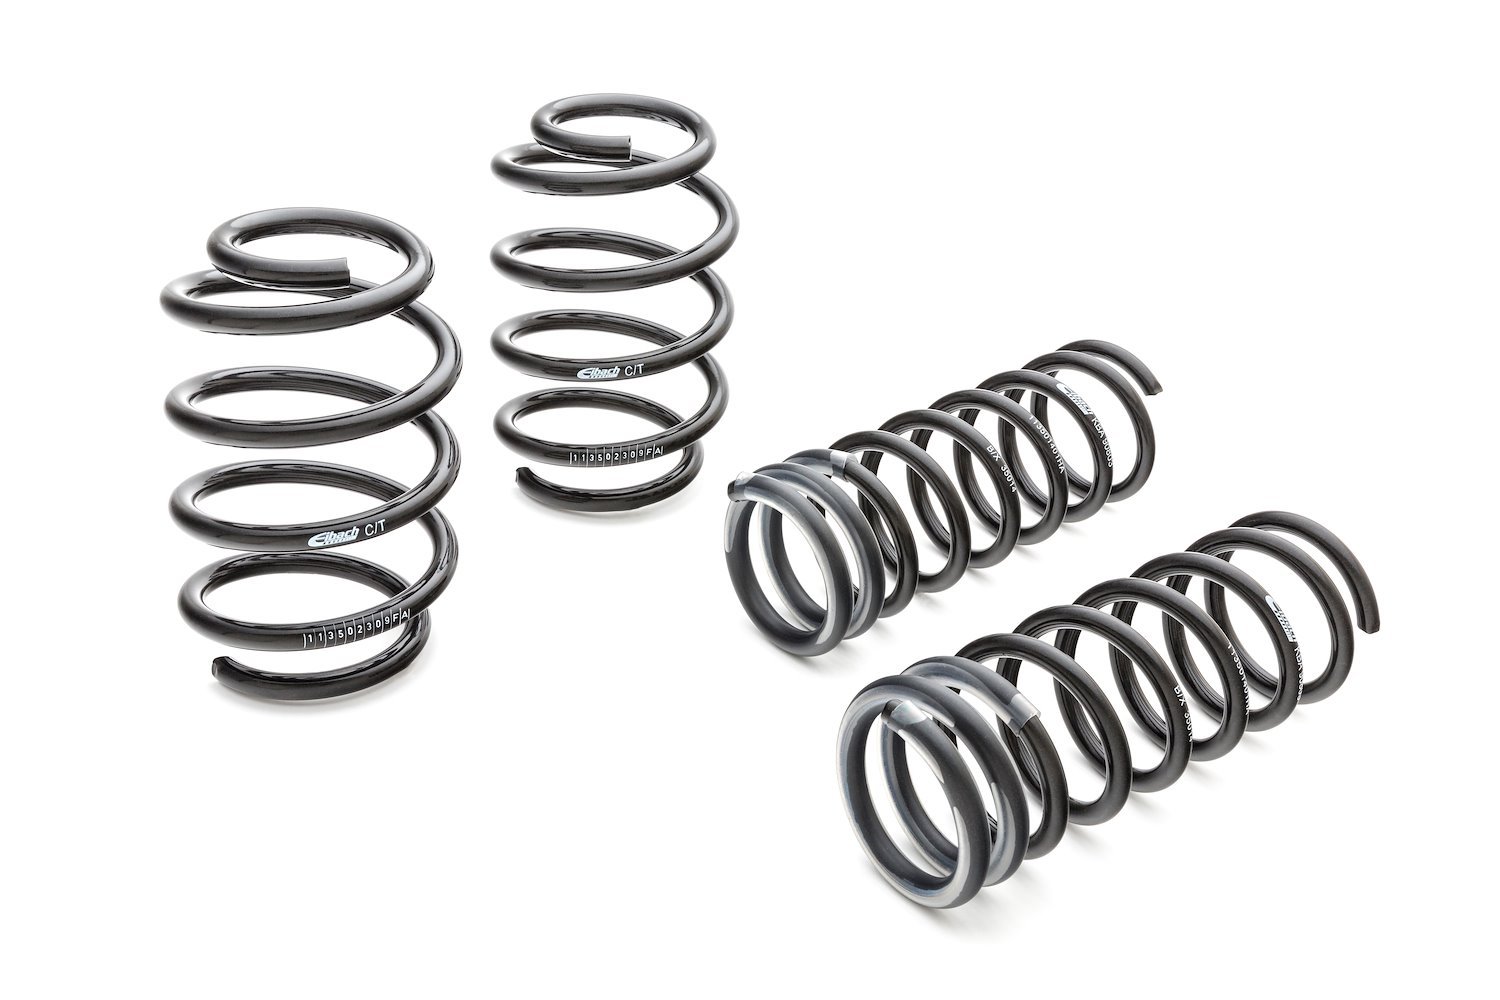 2077.140 Pro-Kit Lowering Springs 2004-2010 BMW 525i/528i/530i - 1.200 in. Front/Rear Drop